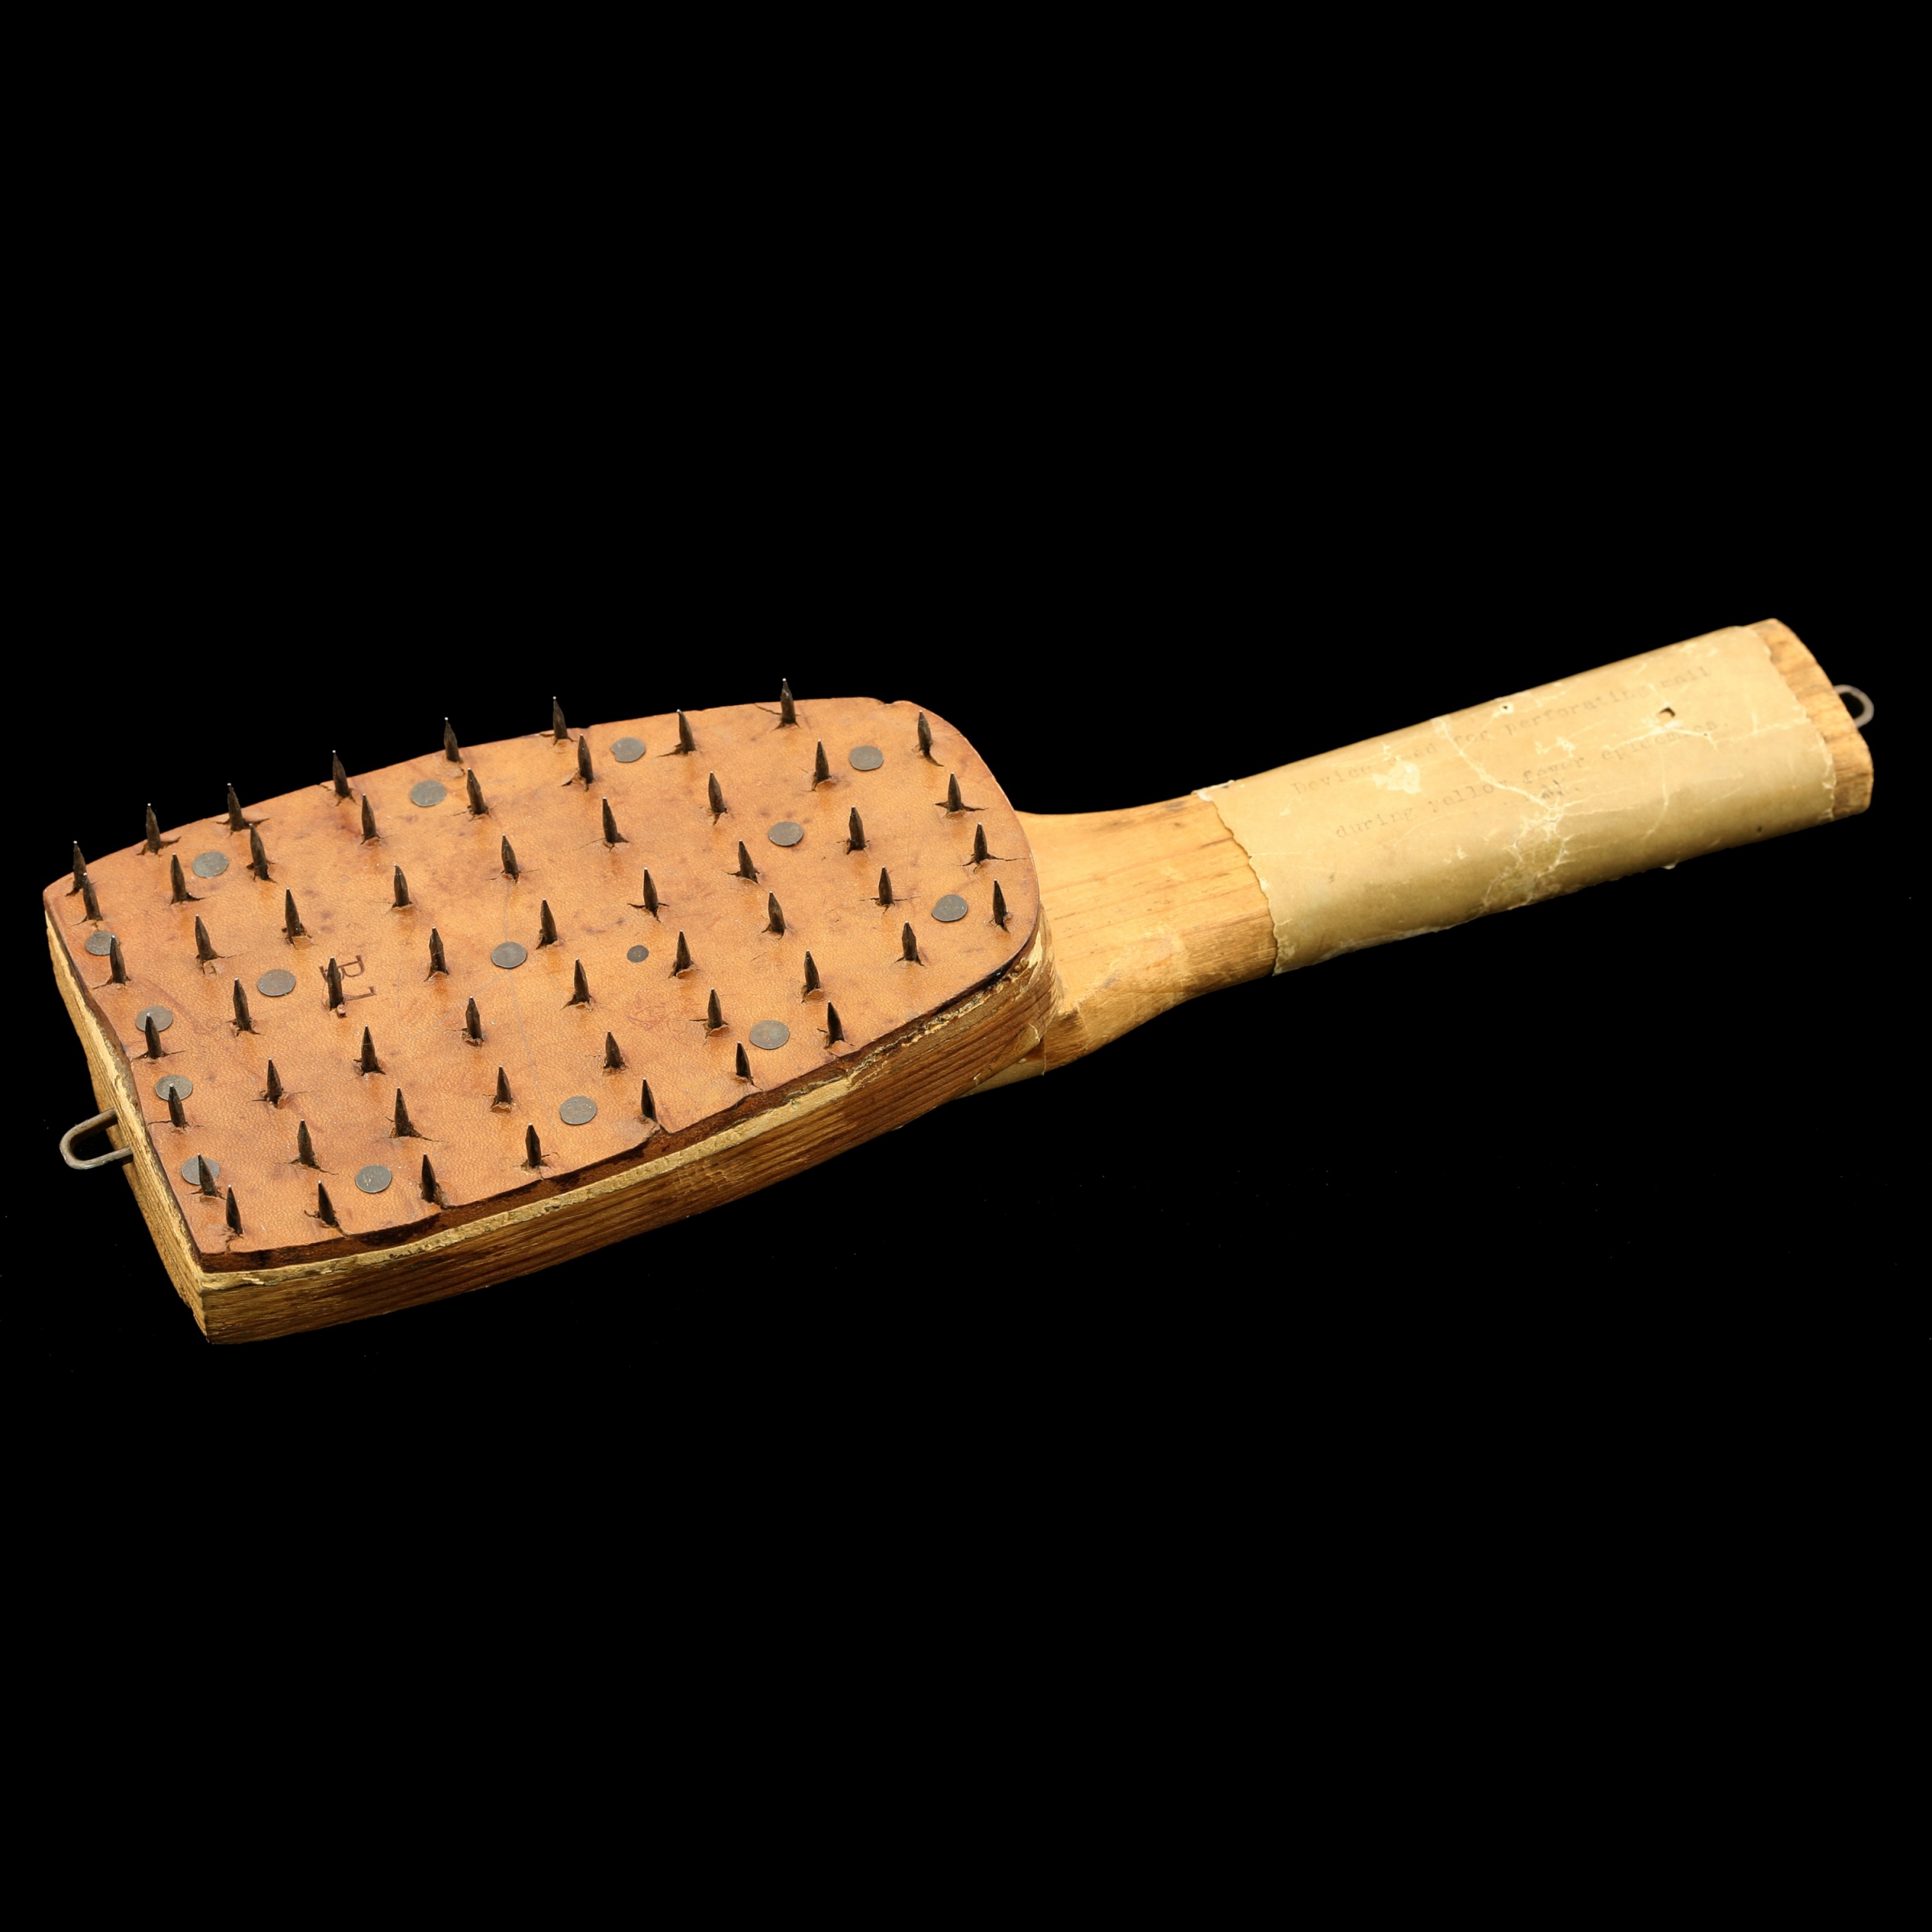 Wooden paddle with nails sticking out of its face.